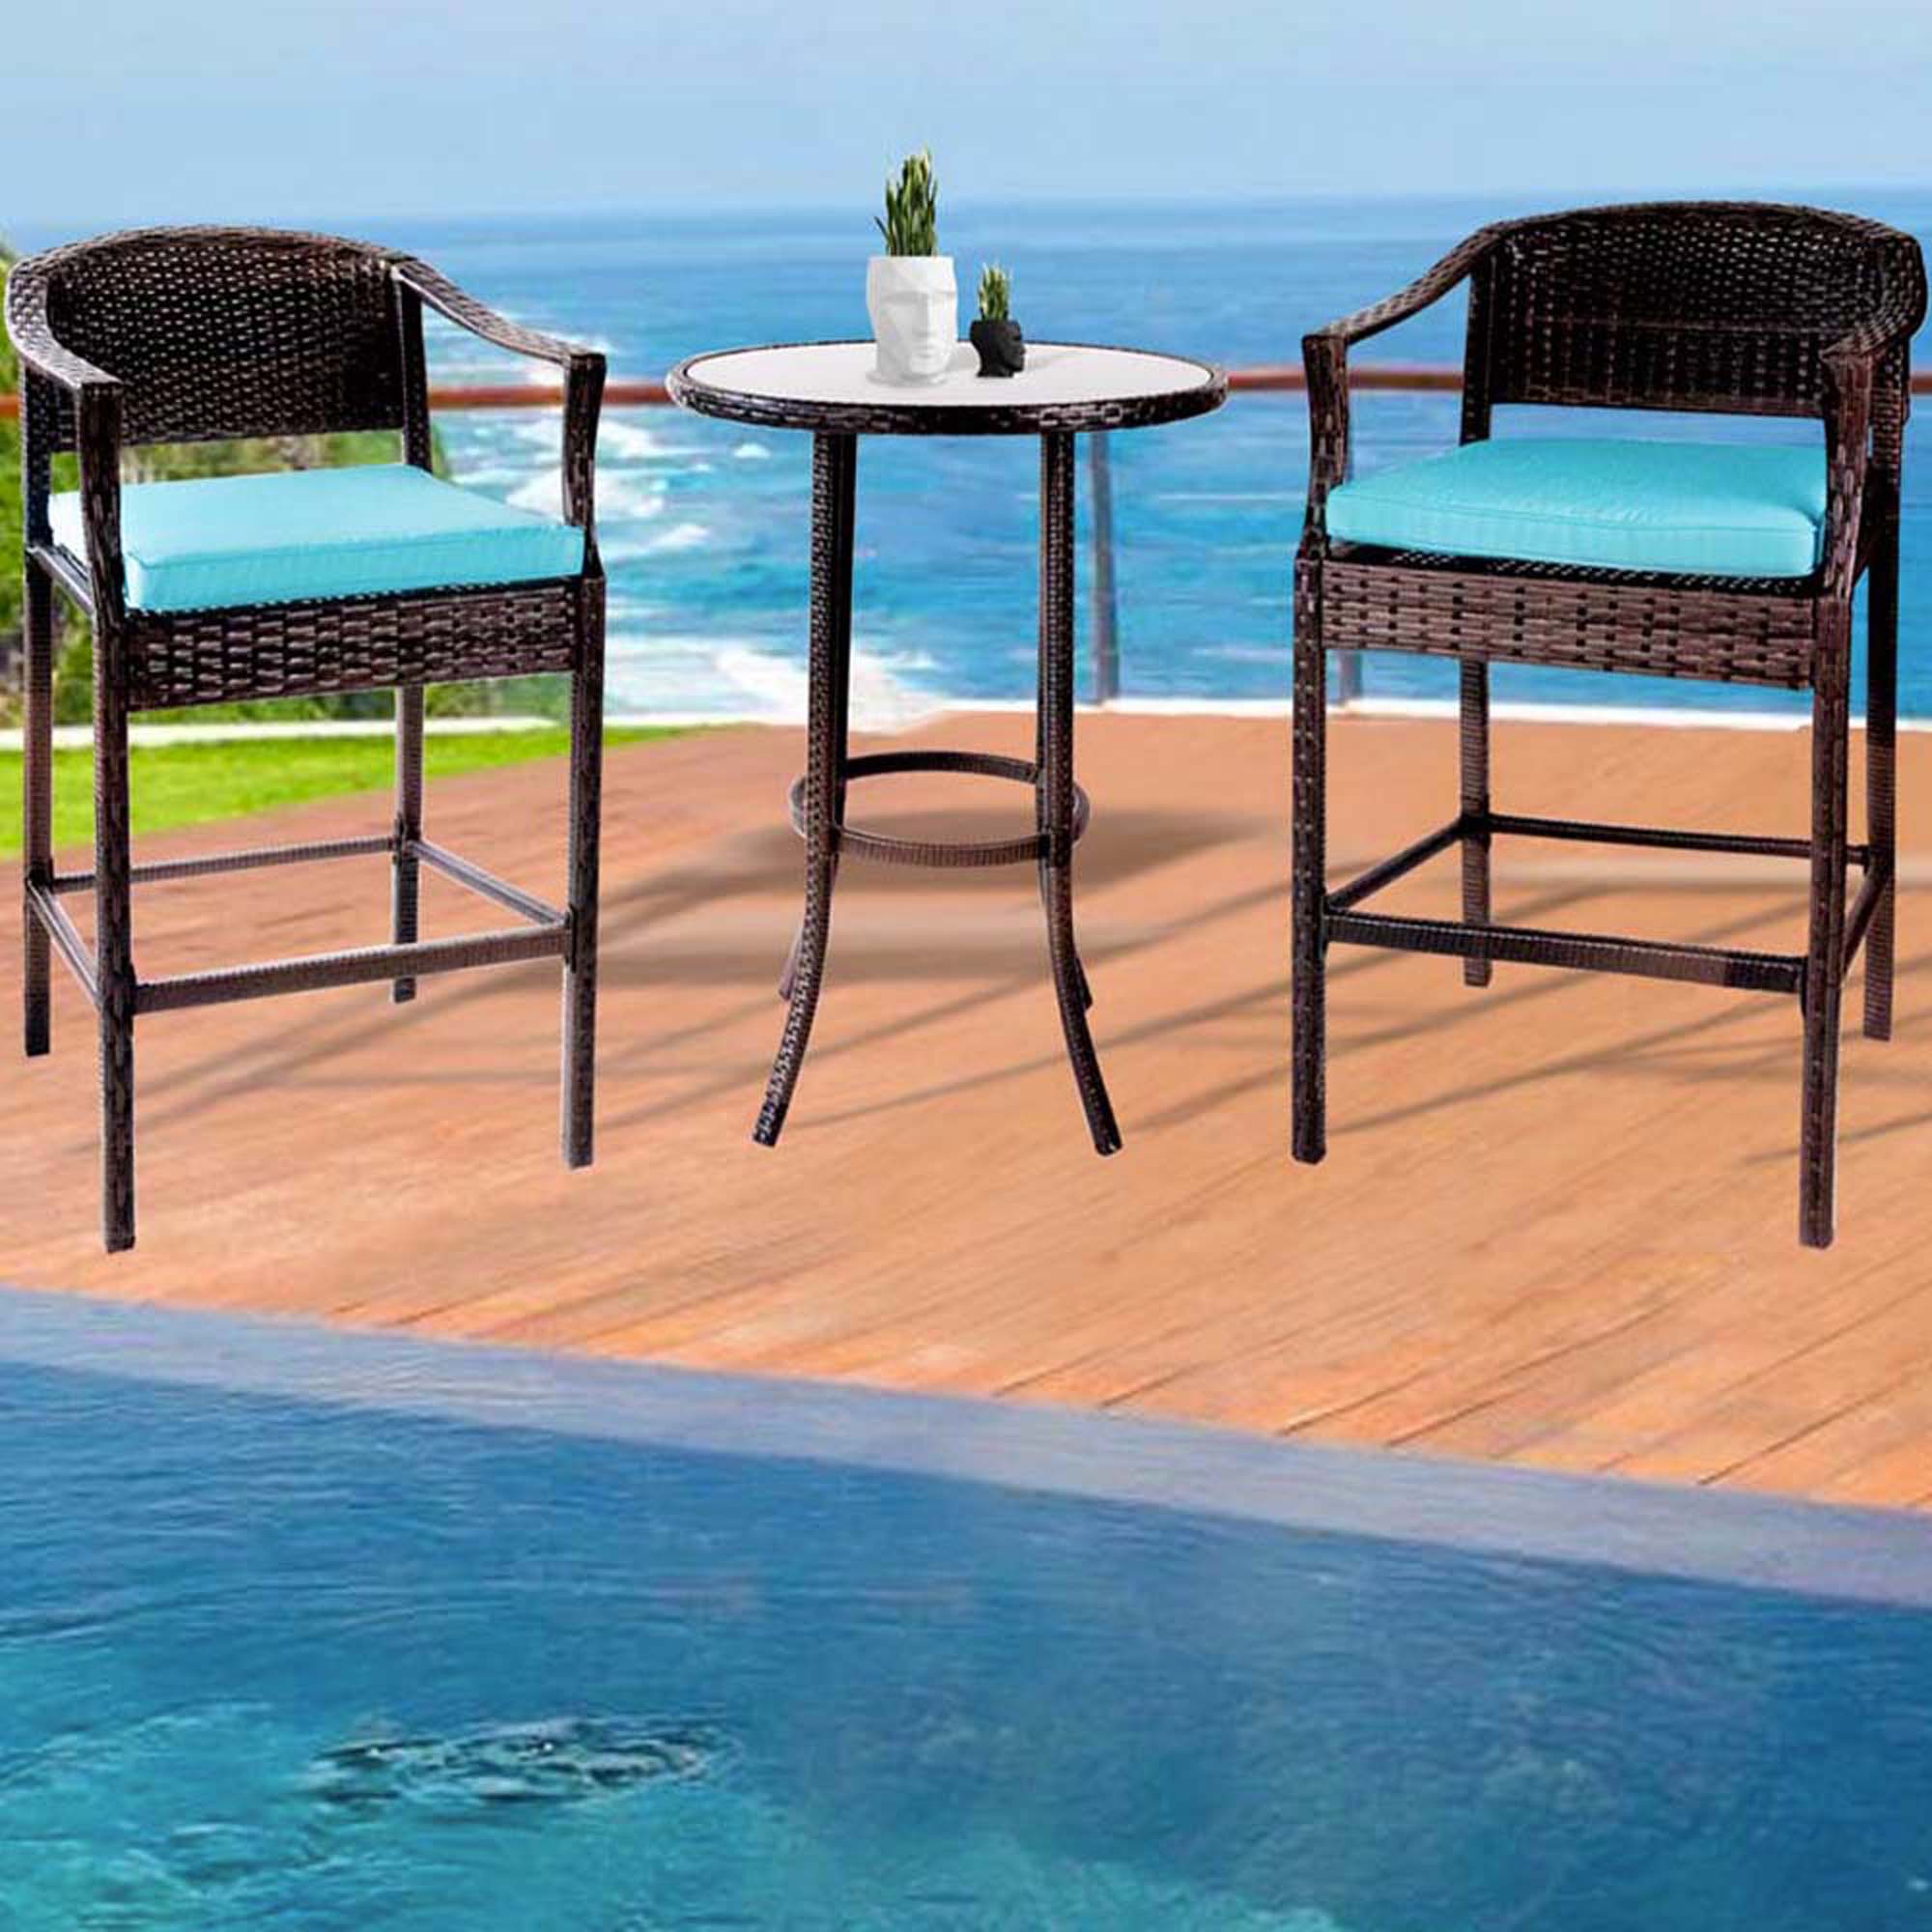 Lightweight Patio Bistro Set, 3 Piece Outdoor Bar Table & Chairs Set, 2 High Bar Chairs & 1 High Glass Top Table, All Weather Metal Frame Furniture Set, Outdoor Patio Set for Garden Yard Cafe, T156 - image 3 of 8